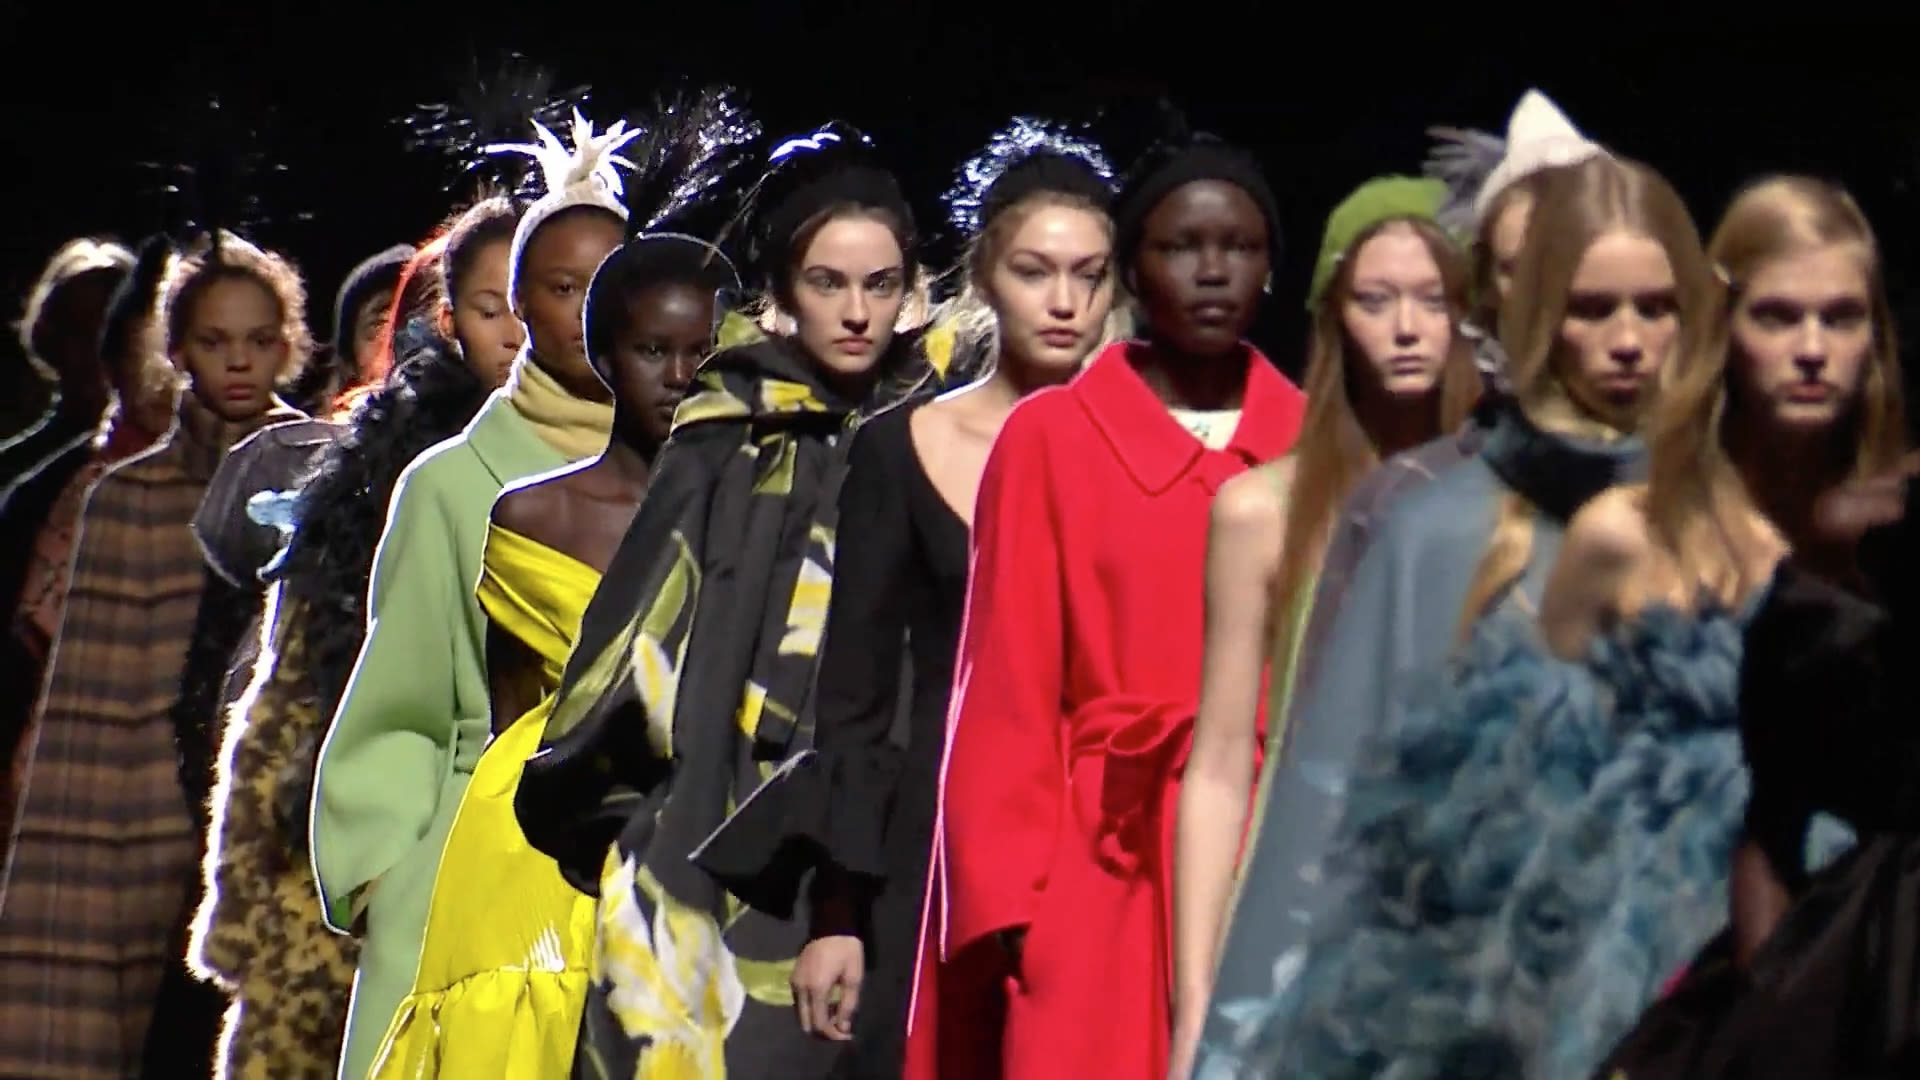 Watch Marc on Film! Behind the Scenes of Marc Jacobs’s Fall 2019 Show ...